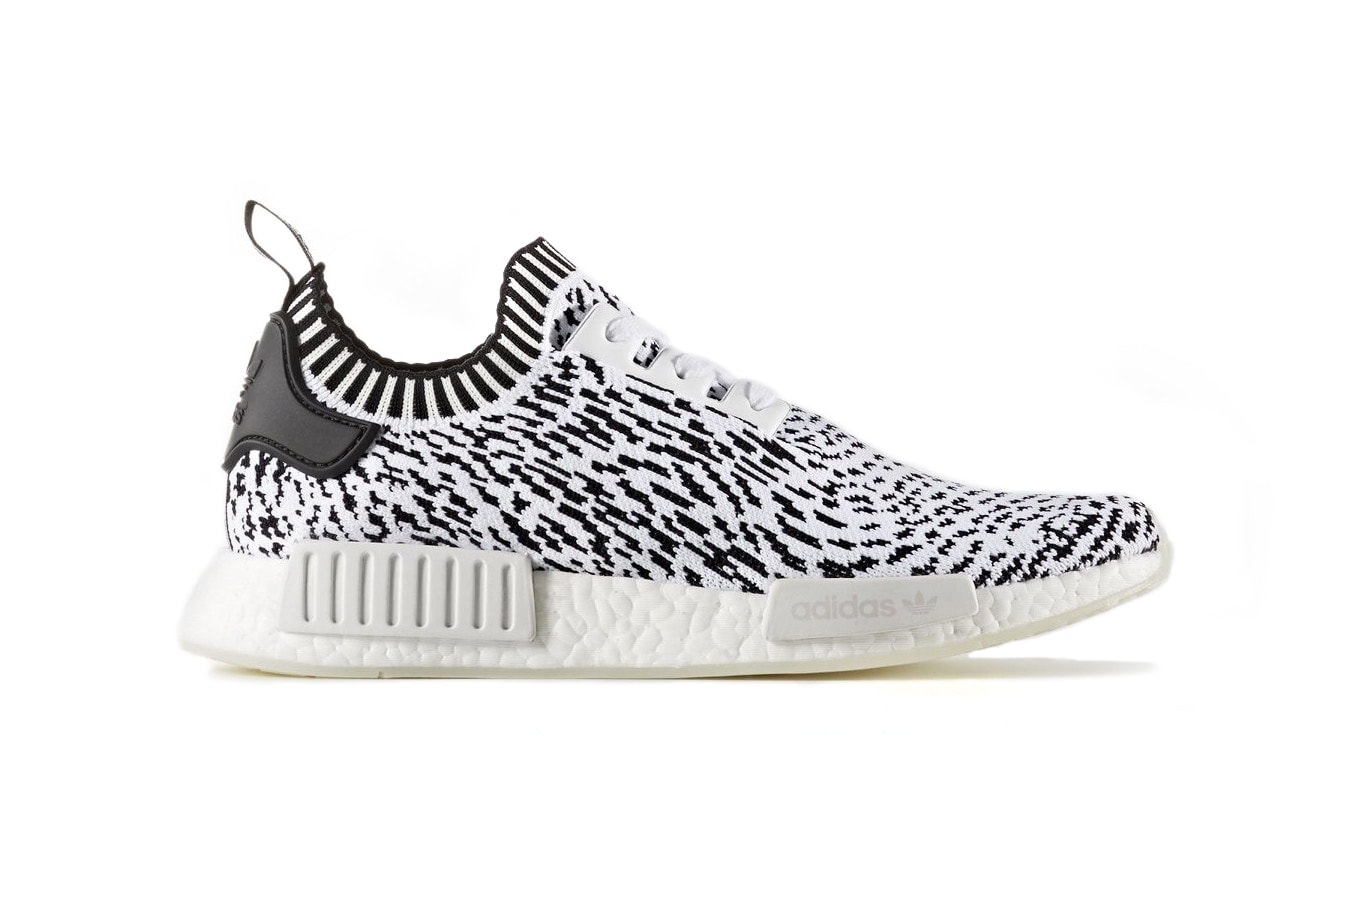 adidas NMD R1 PK Zebra Official Release Date Info 2017 August 17 Sneakers Shoes Footwear